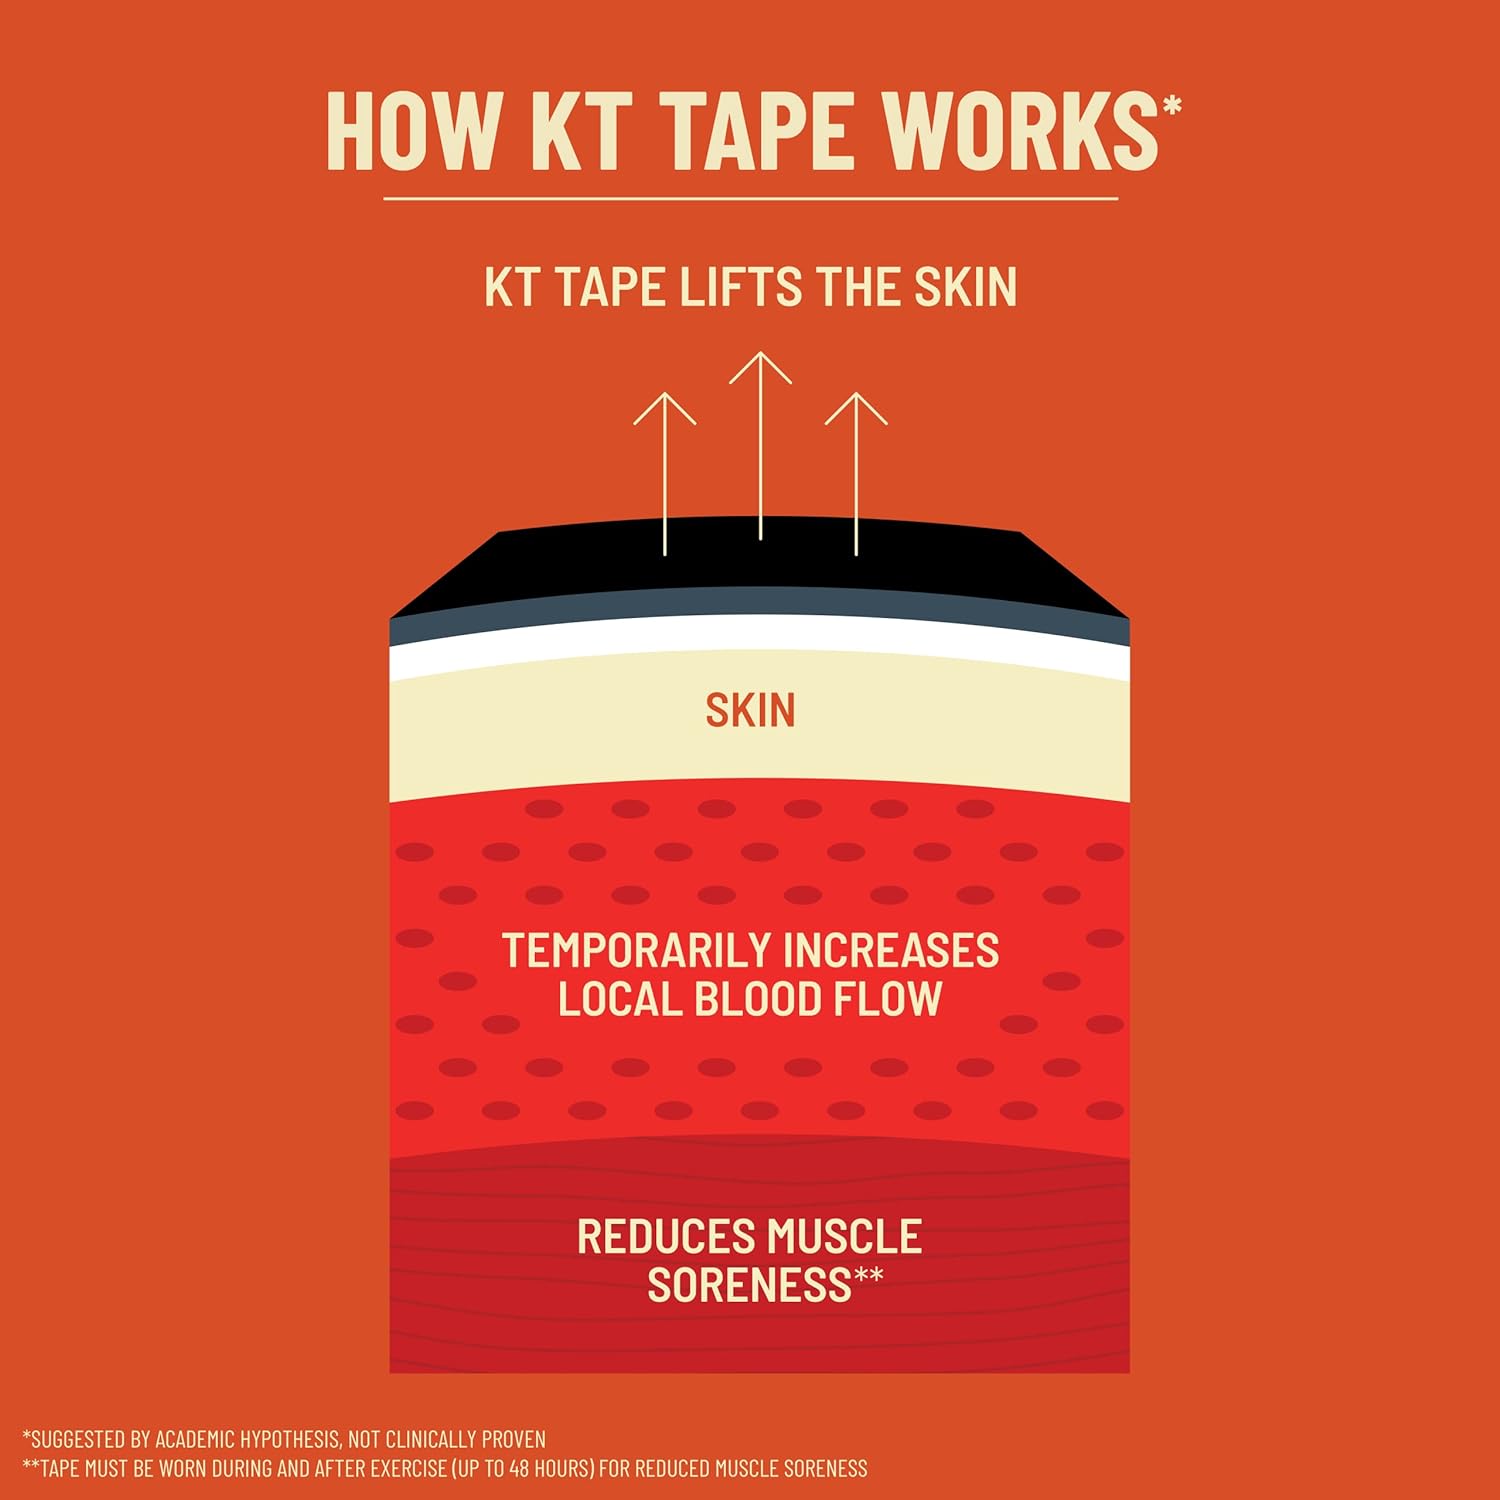 KT Tape Pro Extreme Therapeutic Elastic Kinesiology